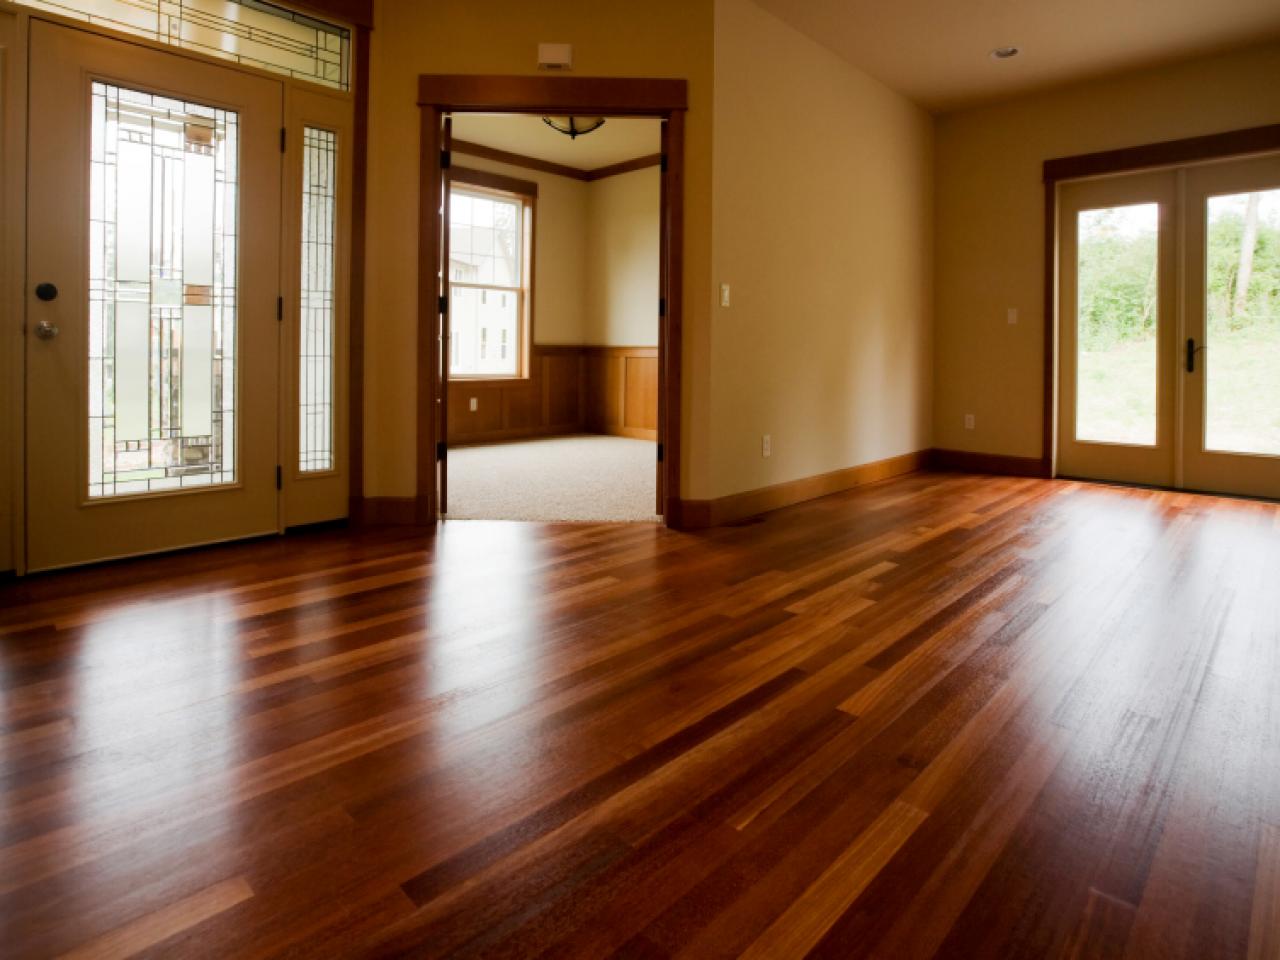 Cleaning Tile Wood And Vinyl Floors, Care Of Hardwood Floors In Kitchen